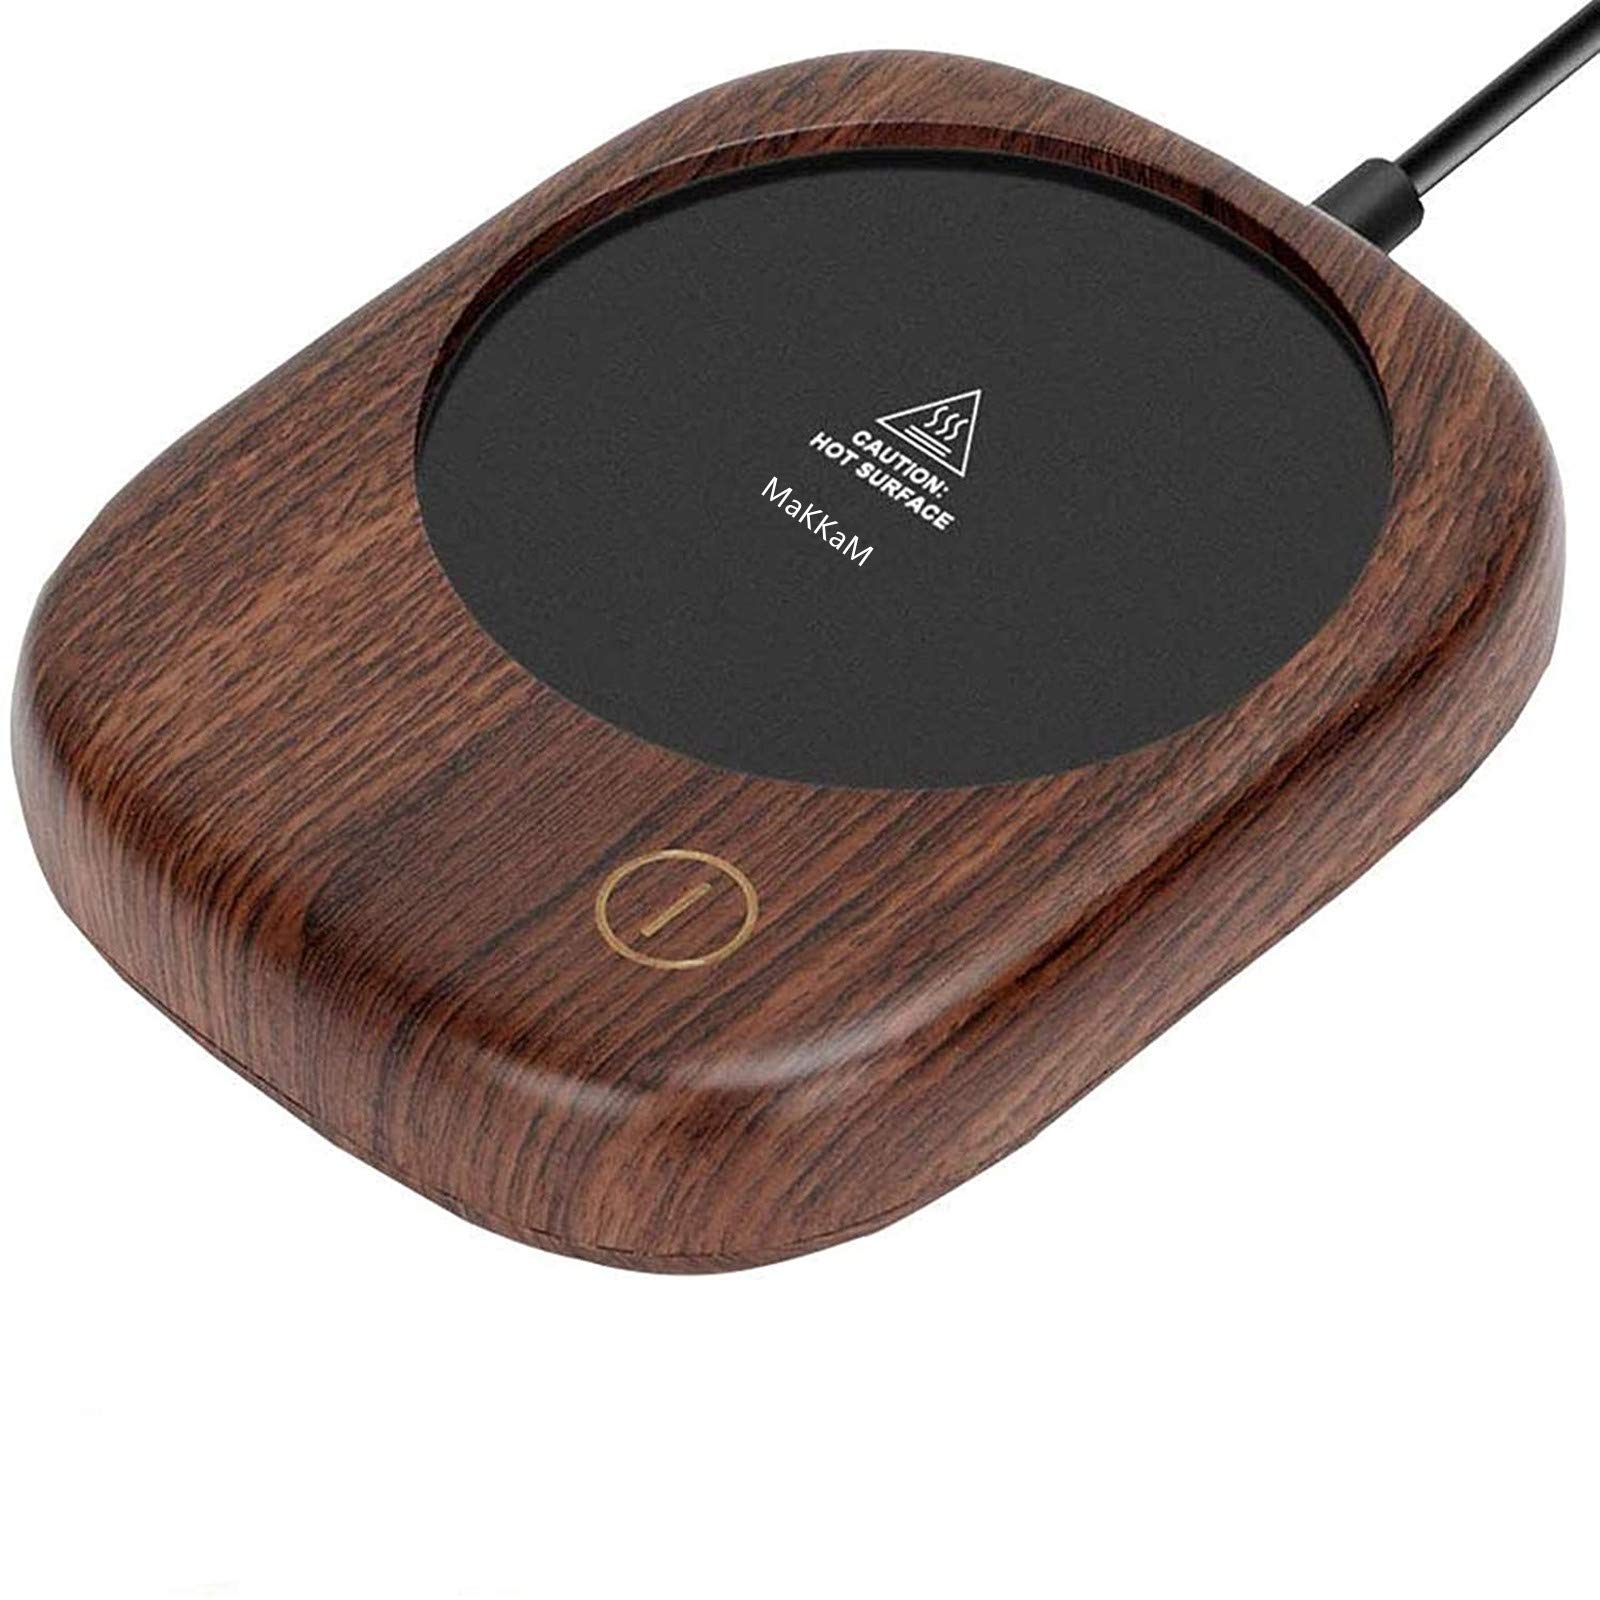 Coffee Cup Warmer for Desk with Touch Screen Switch, Coffee Mug Warmer for Office Home Use, Cup Warmer Plate for Coffee, Milk, Tea, Water(wood grain)